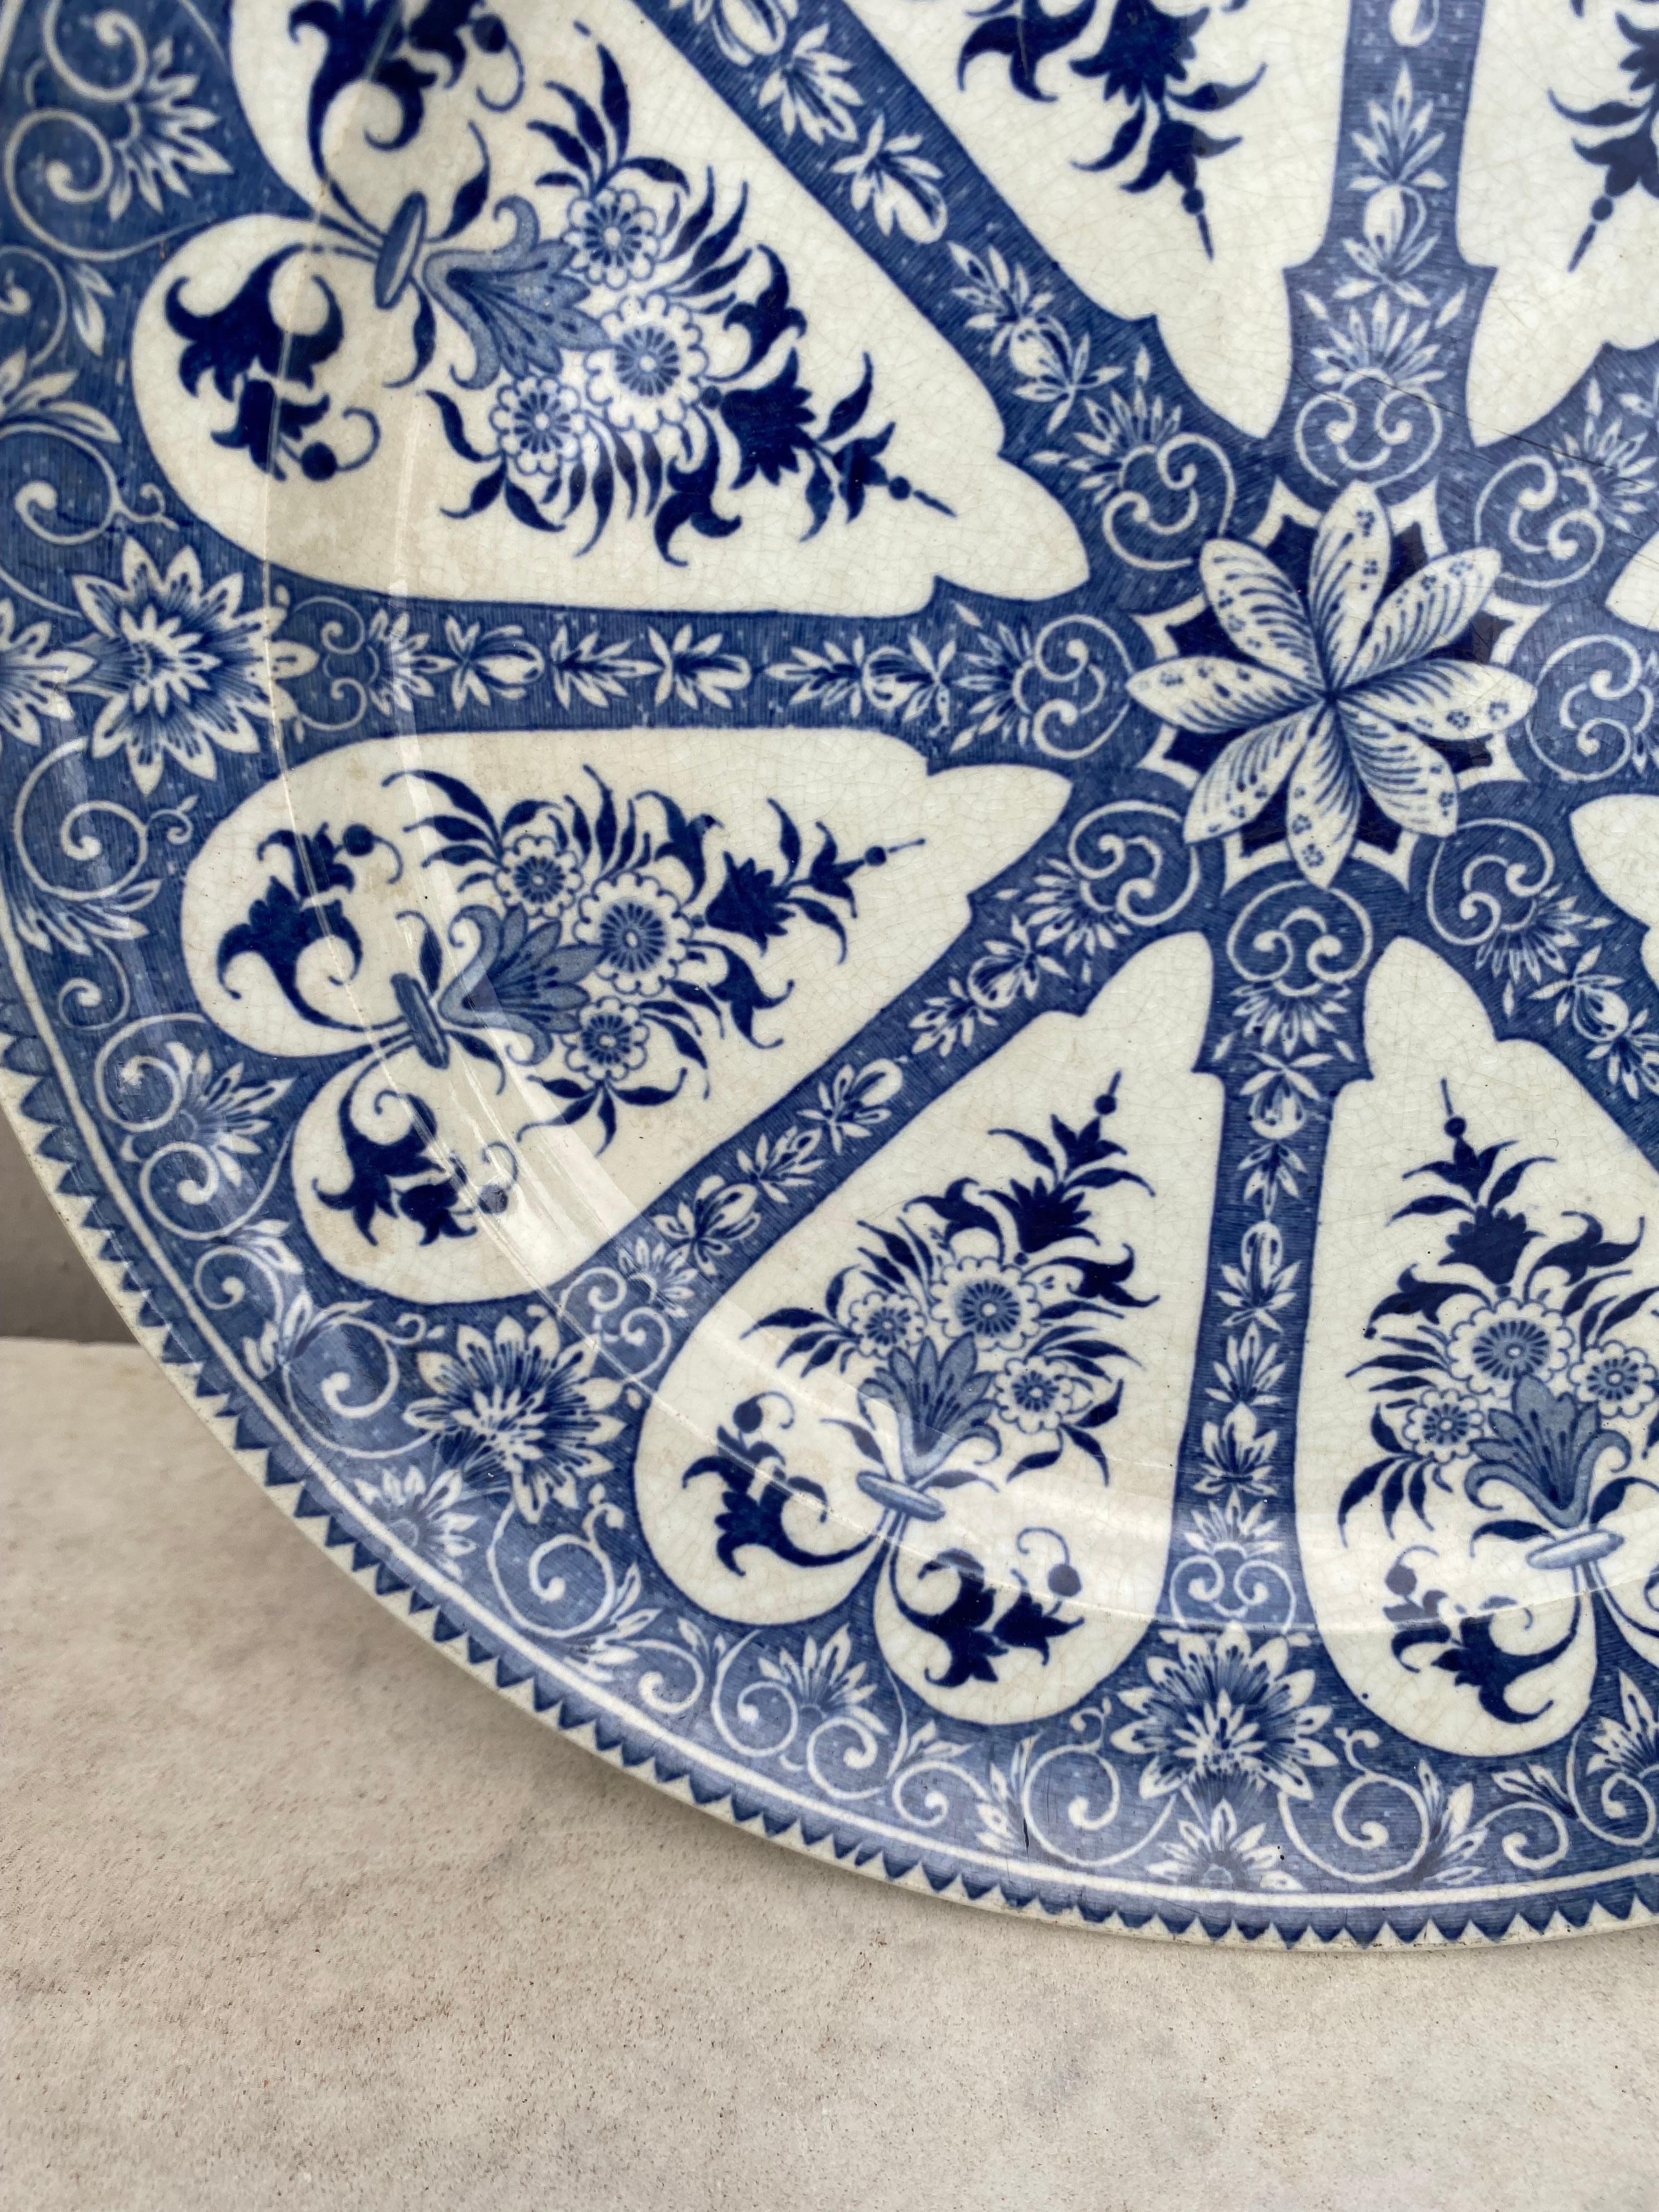 French Provincial 19th Century French Blue & White Faience Dinner Plate Sarreguemines For Sale